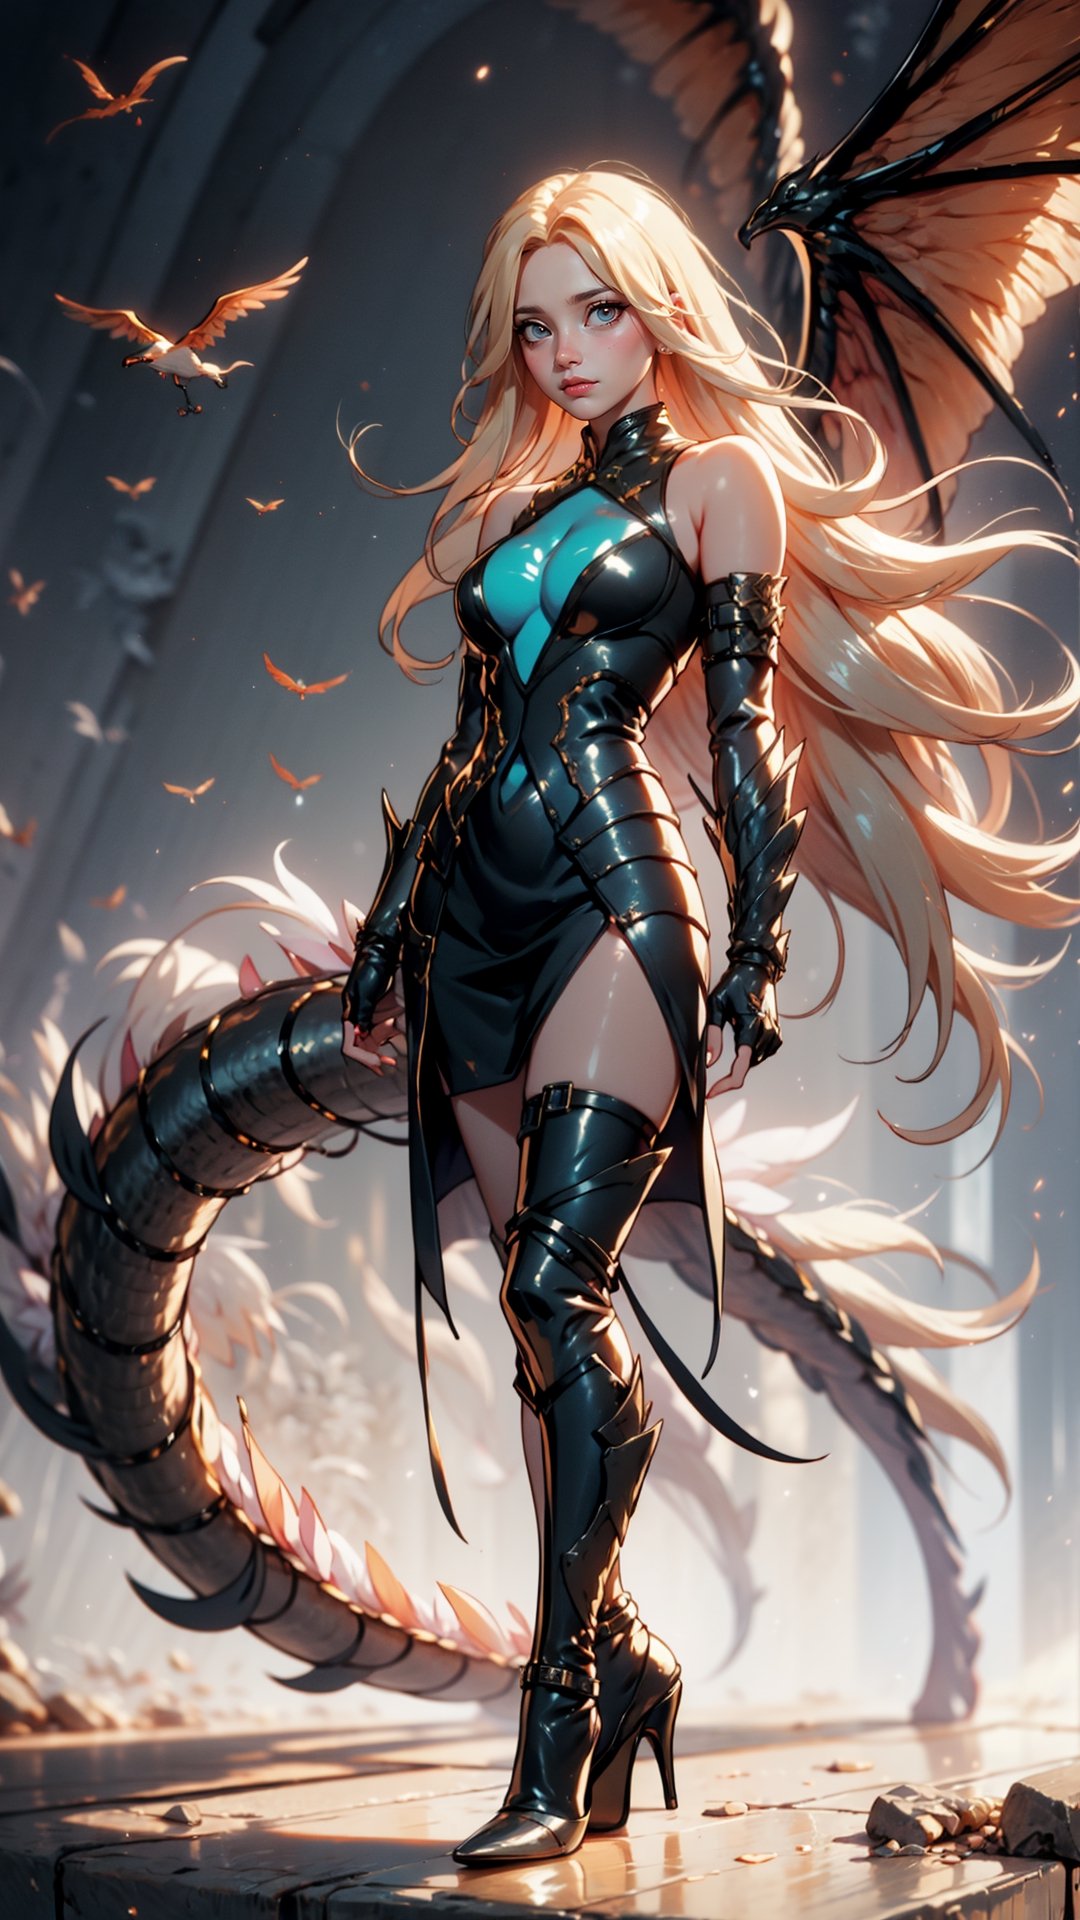 An award-winning portrait of a stunning woman, wearing a mechanical exoskeleton, standing amidst a battleground with dragons soaring in the sky. The realistic depiction captures the epic war scene with incredible detail. The cinematic effect, combined with teal and orange hues, adds depth and intensity to the composition. The cyberpunk ninja-style character stands solo, emanating power and confidence as she surveys the battlefield.